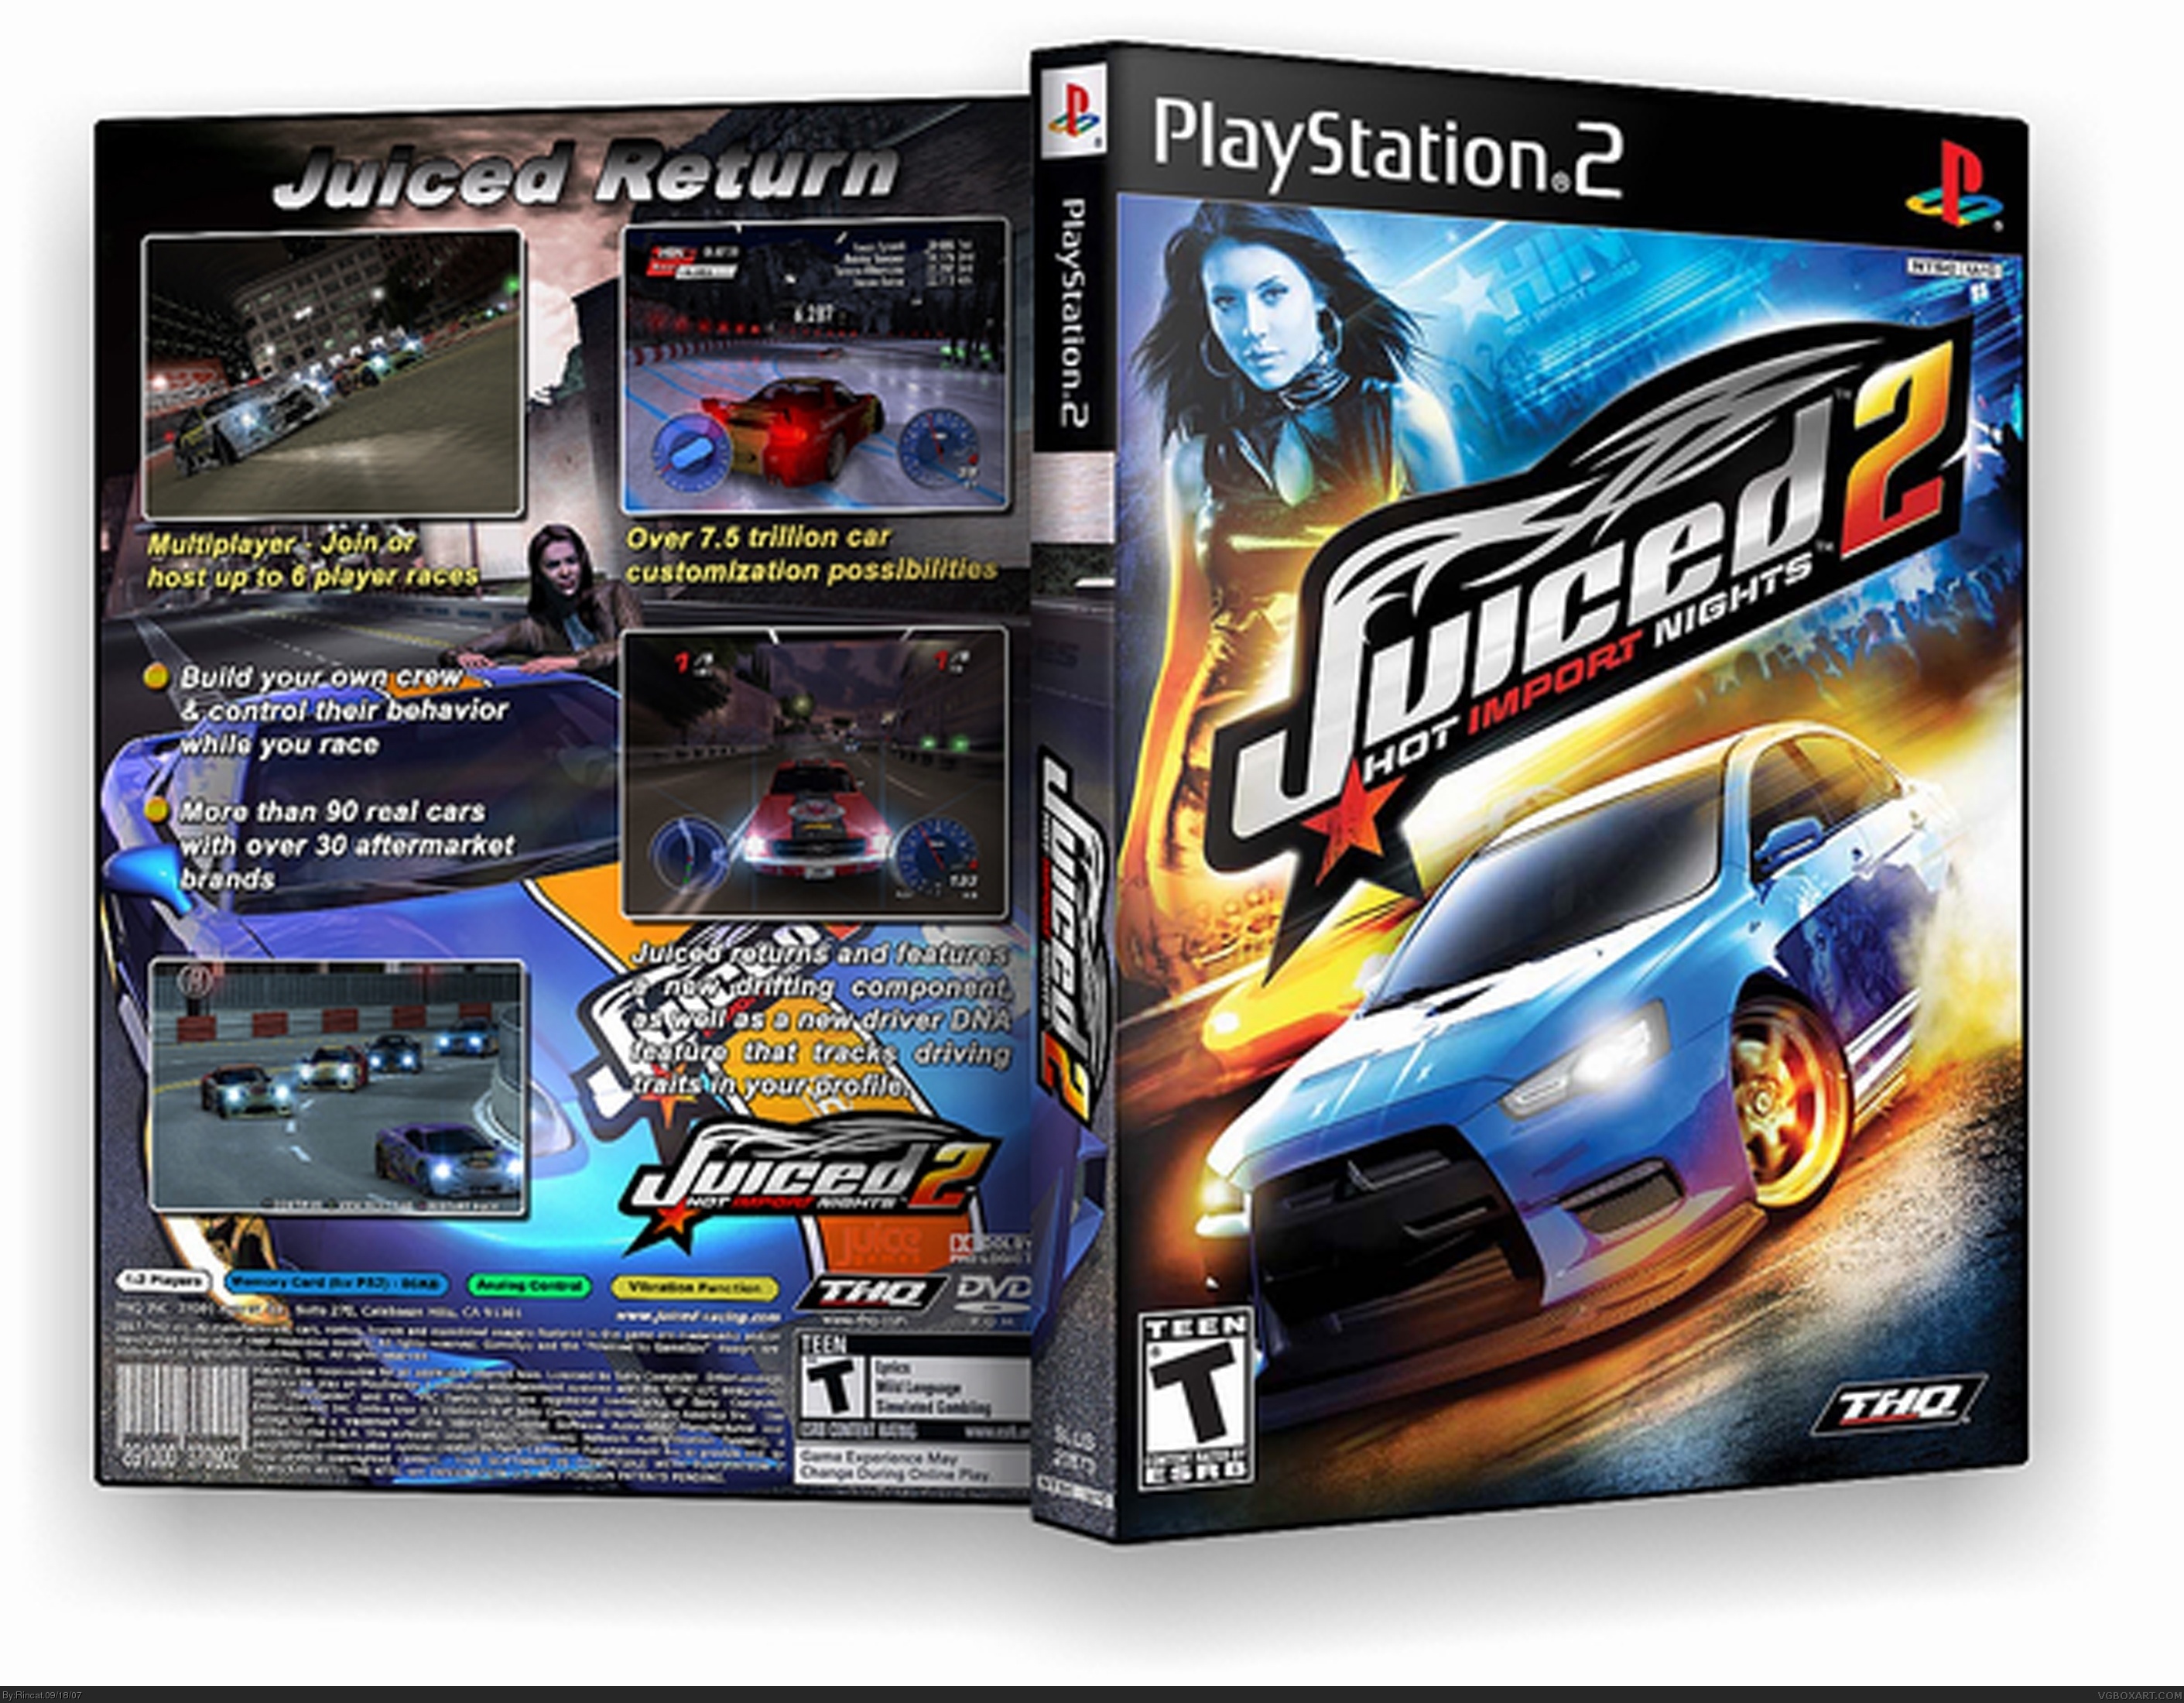 Juiced 2: Hot Import Nights box cover